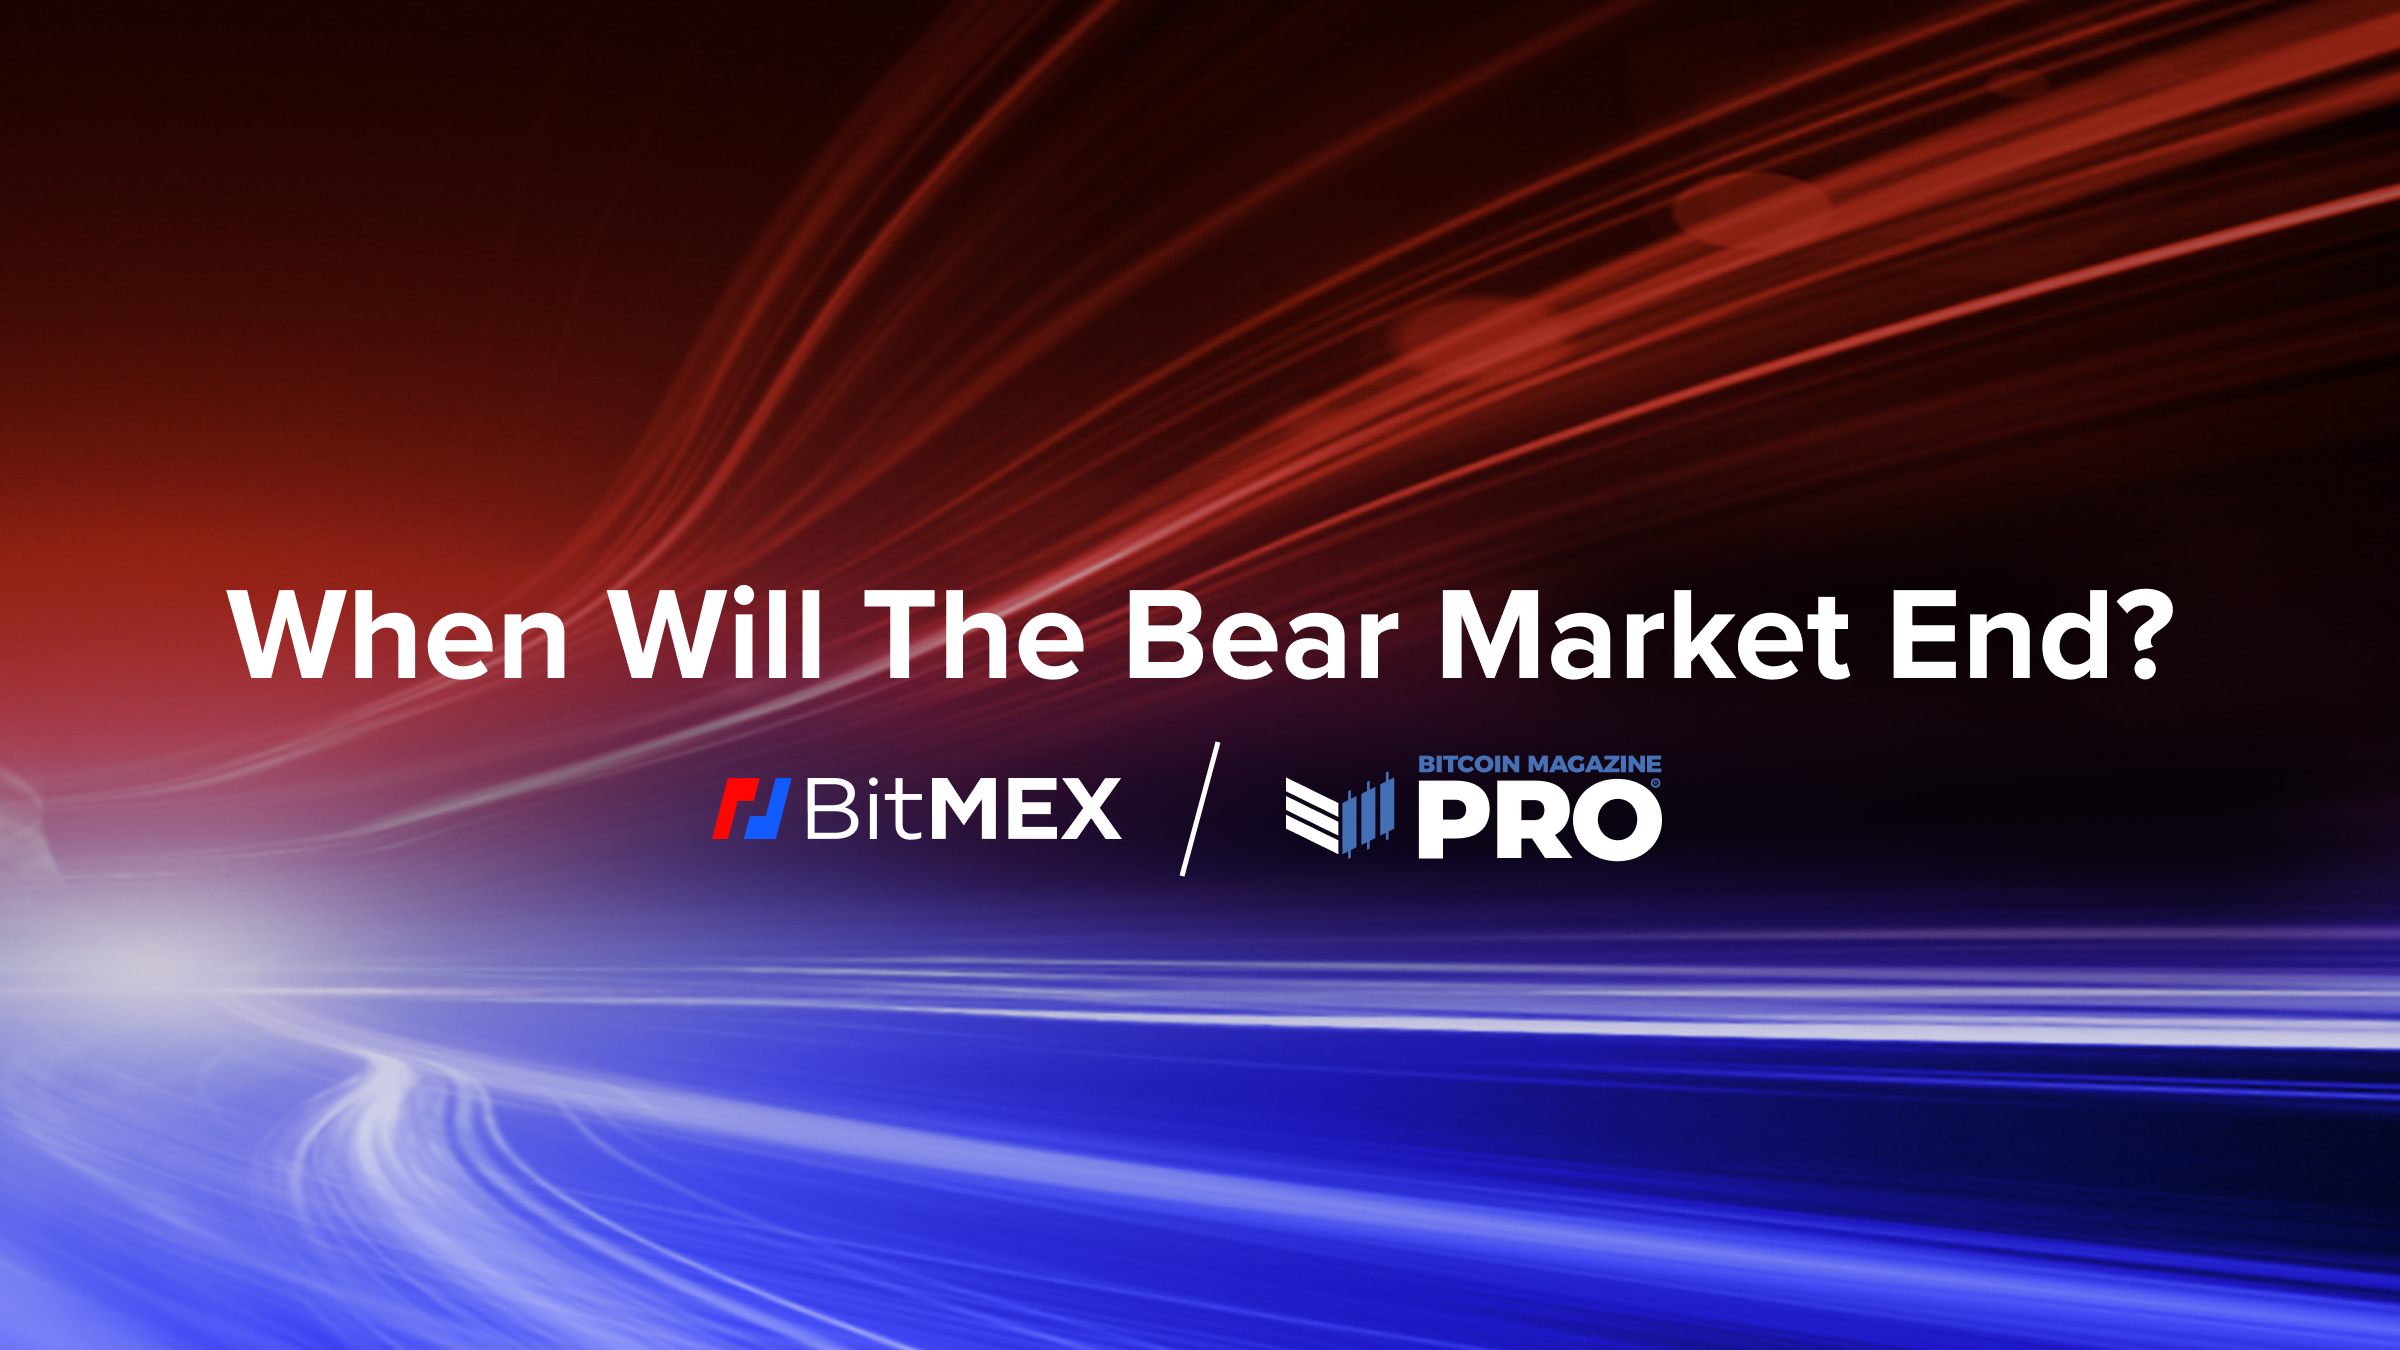 On this week’s The Market Report show, Cointelegraph’s resident experts discuss how much longer this crypto bear market could possibly last and when we could see some volatility back in the markets.